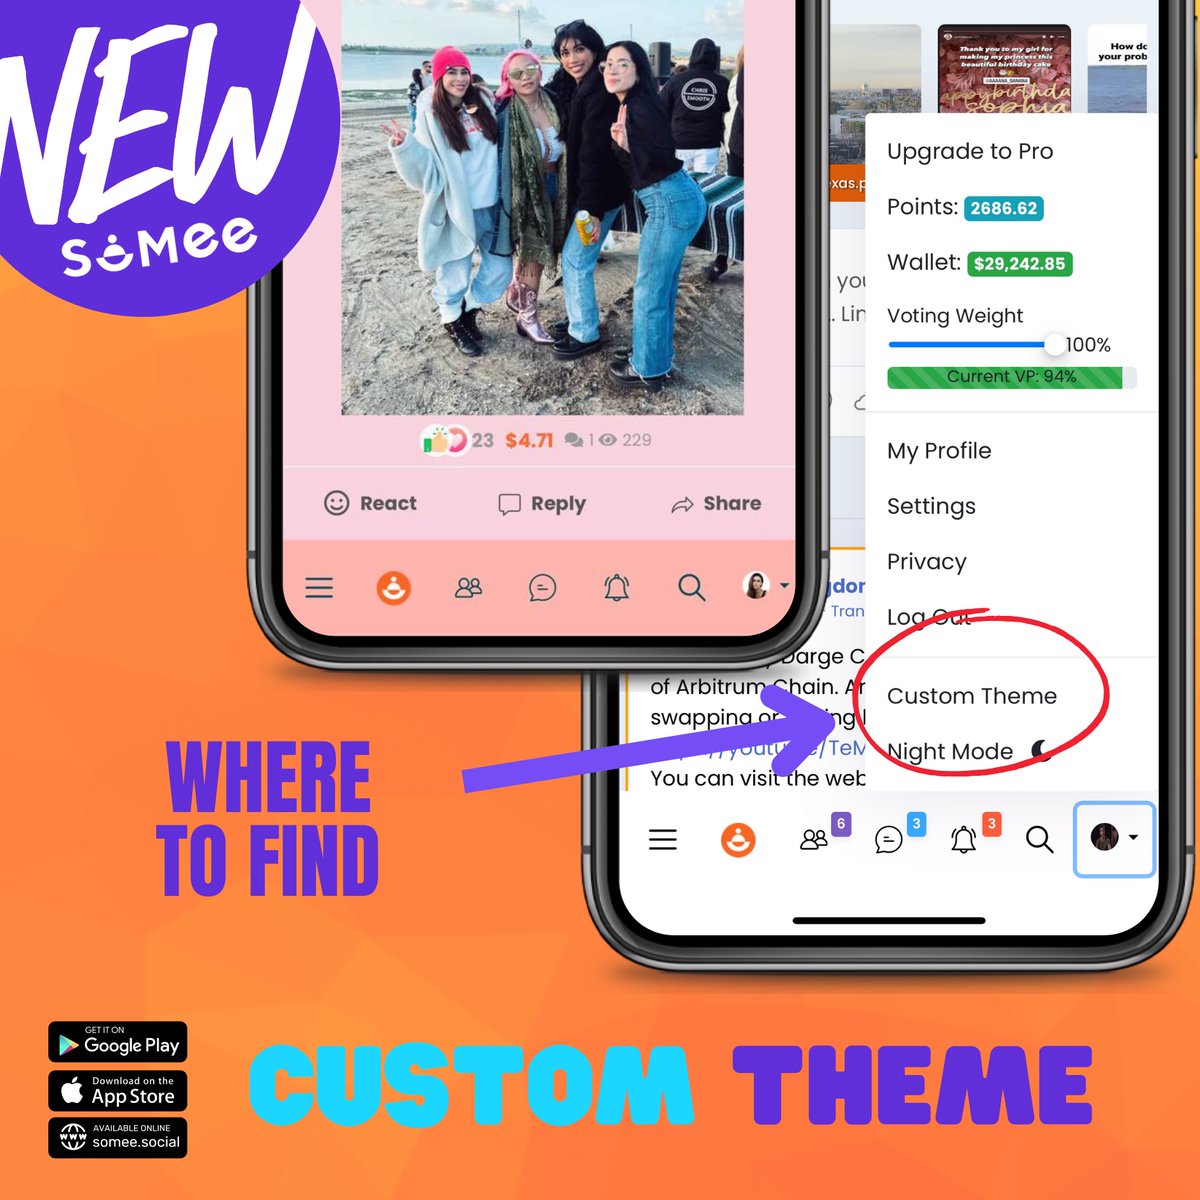 NEW🤩Set your own COLORS with CUSTOM THEME🌈
Where to find? #NewFeature #SoMee #YourVoiceYourChoice 😍